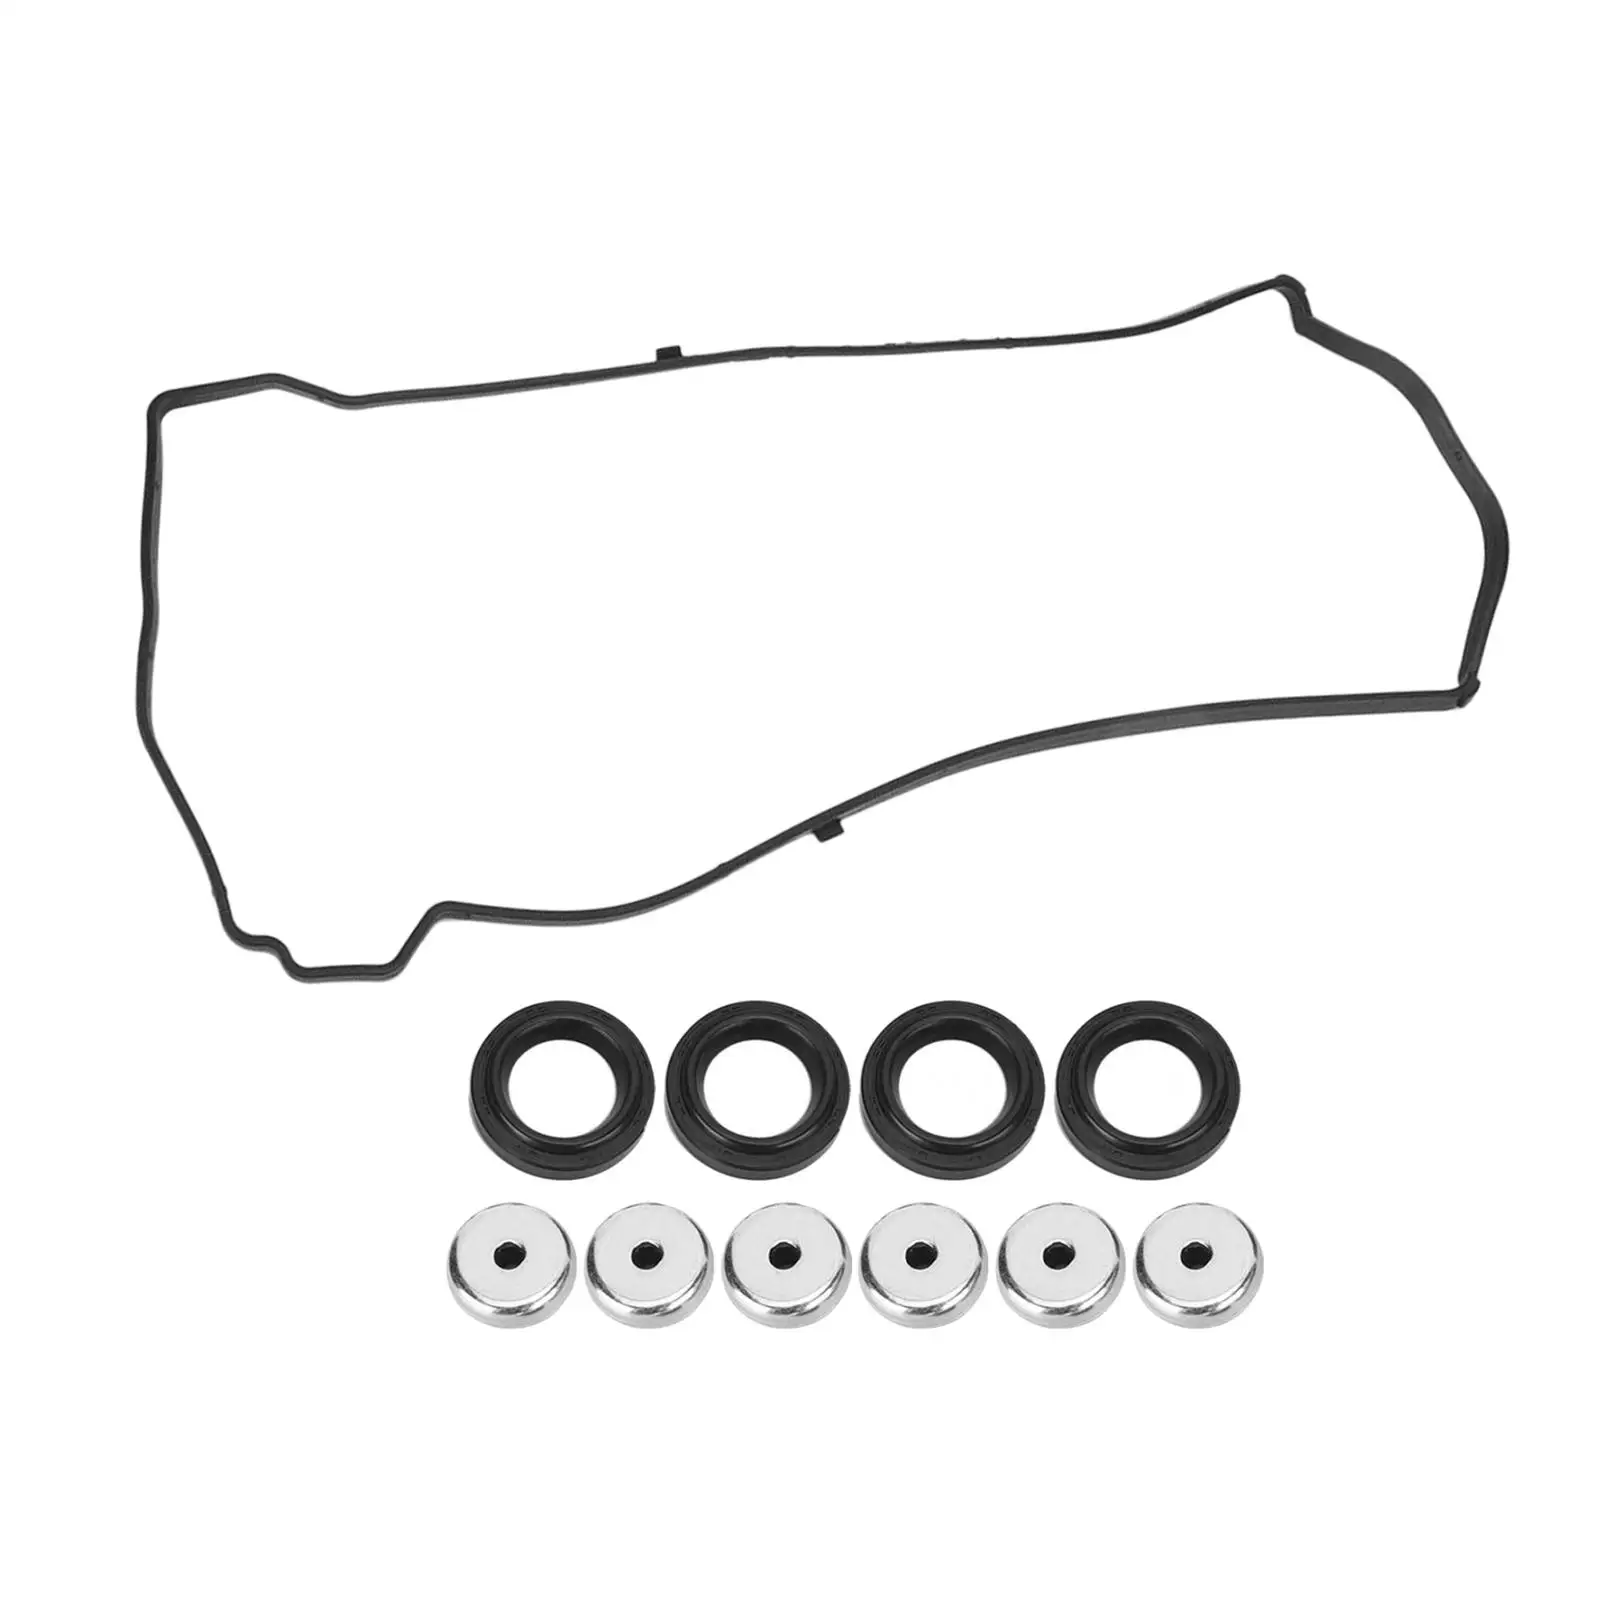 Valve Cover Gasket Seal 12030-pnc-000 Replacement Parts for Honda Acura